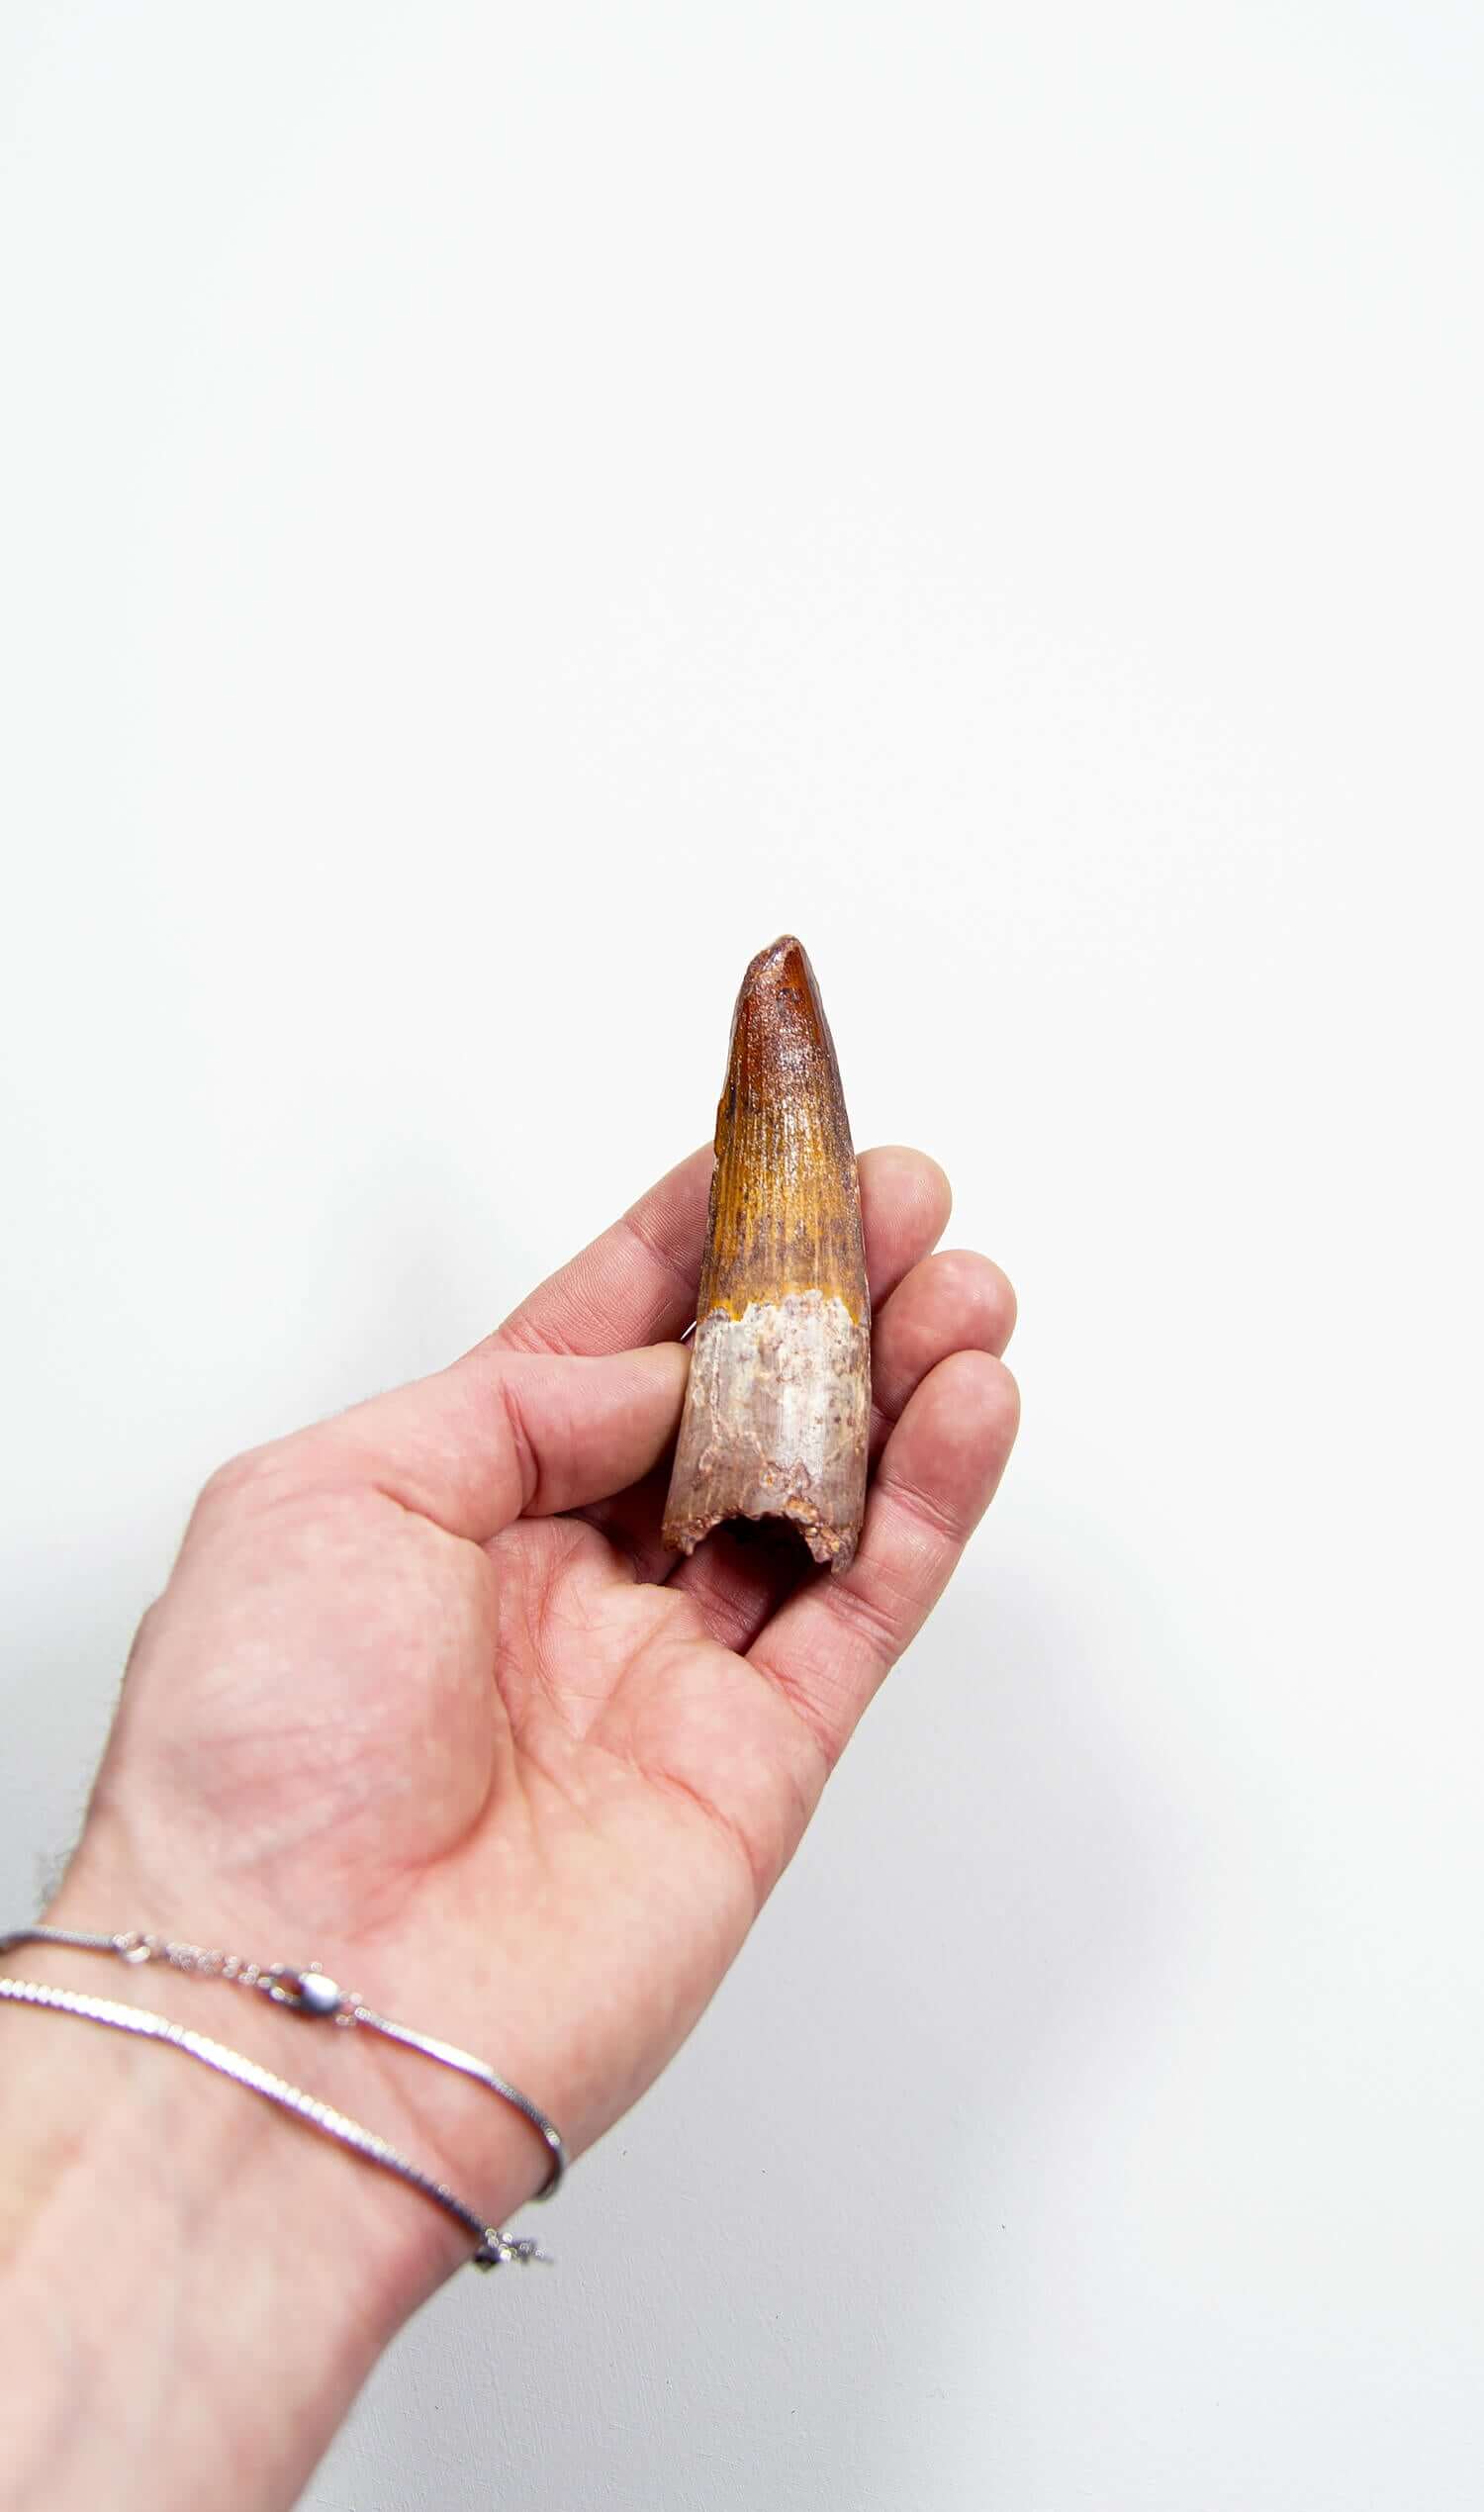 fossil dinosaur spinosaurus tooth for sale at the uk fossil store 91